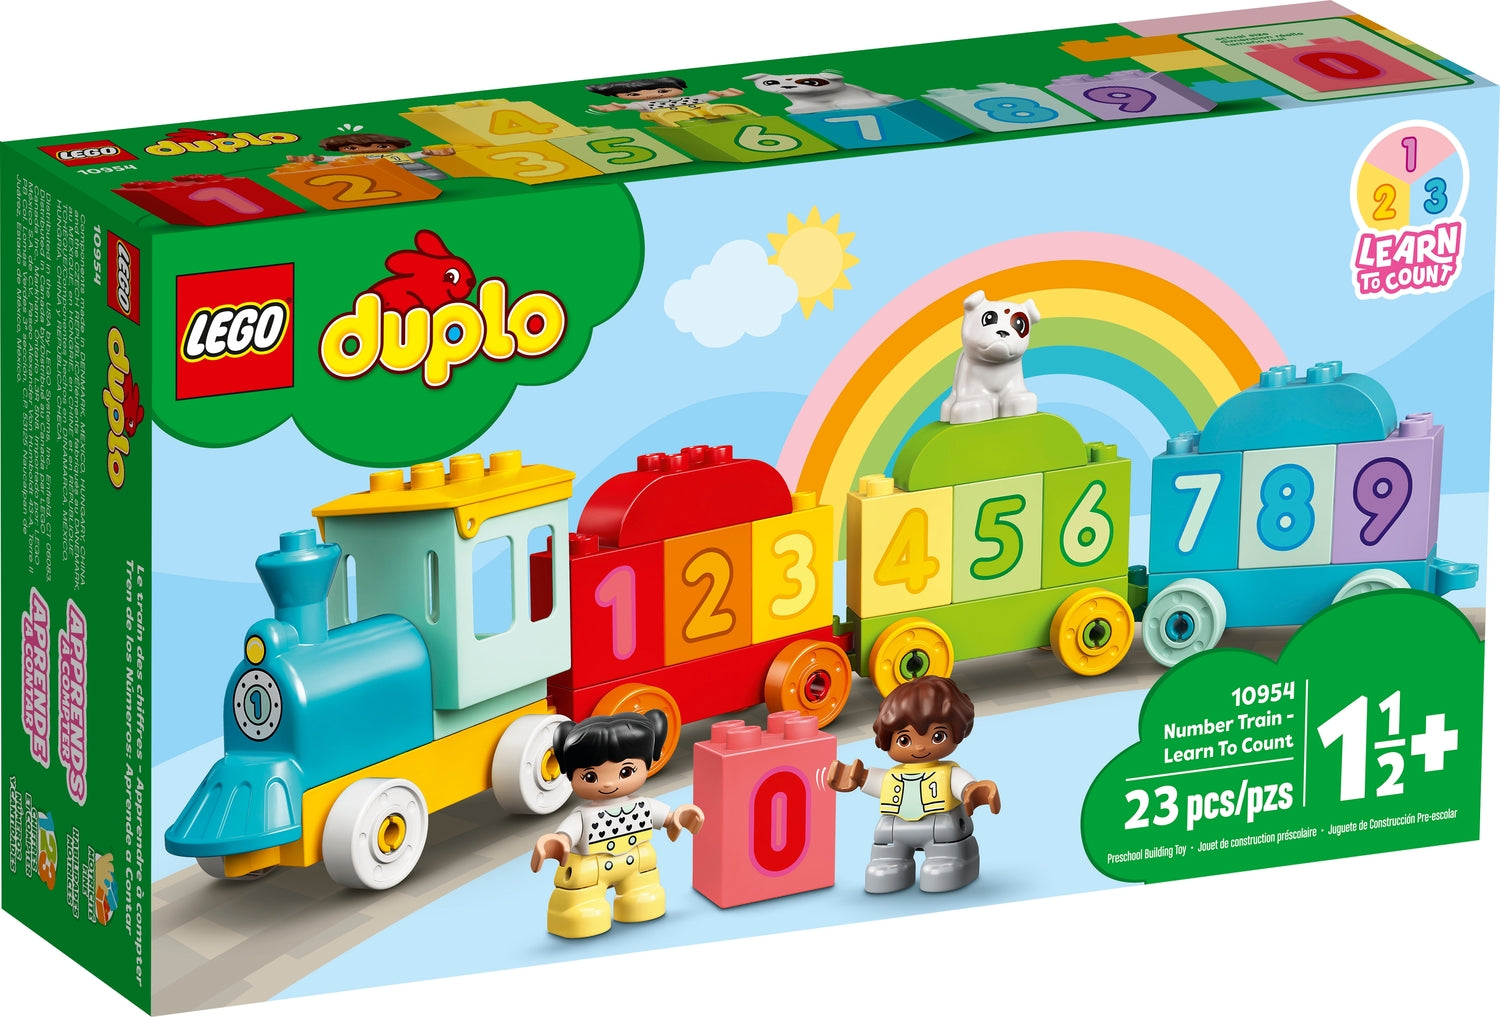 reptielen Laster koken LEGO DUPLO: Number Train - Learn To Count| TimbukToys